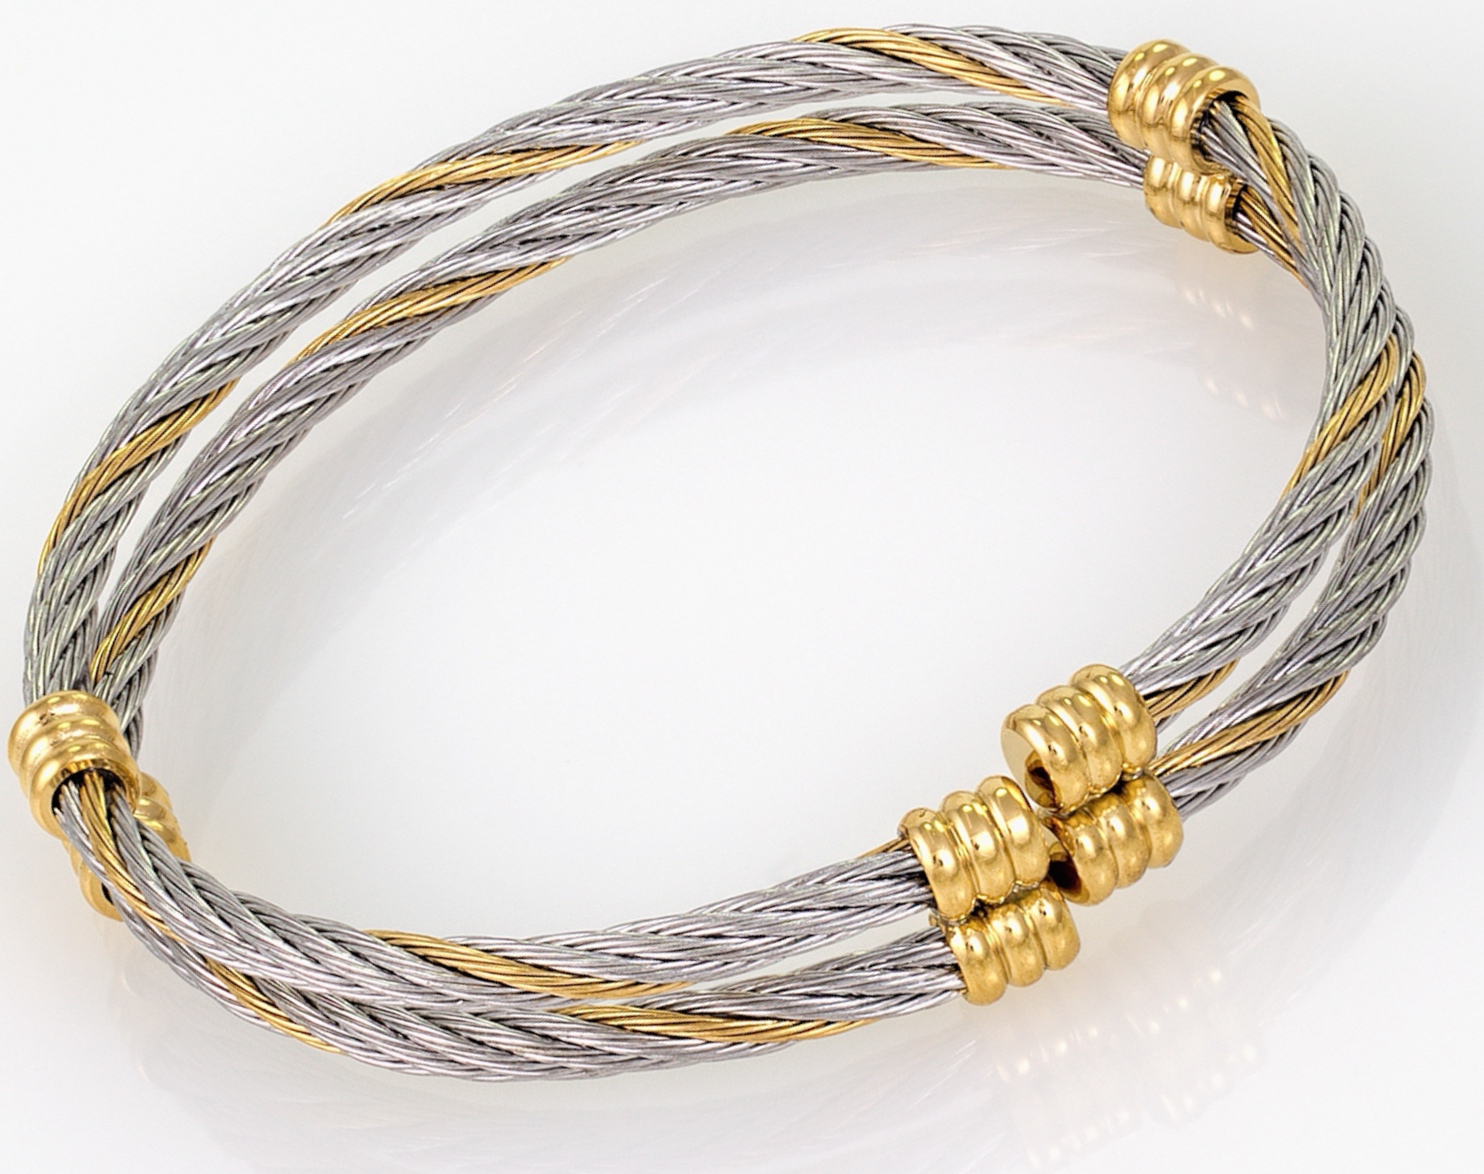 YourGroundedJWP – Stainless 2 Wire Cable Bangle w/Gold Accents